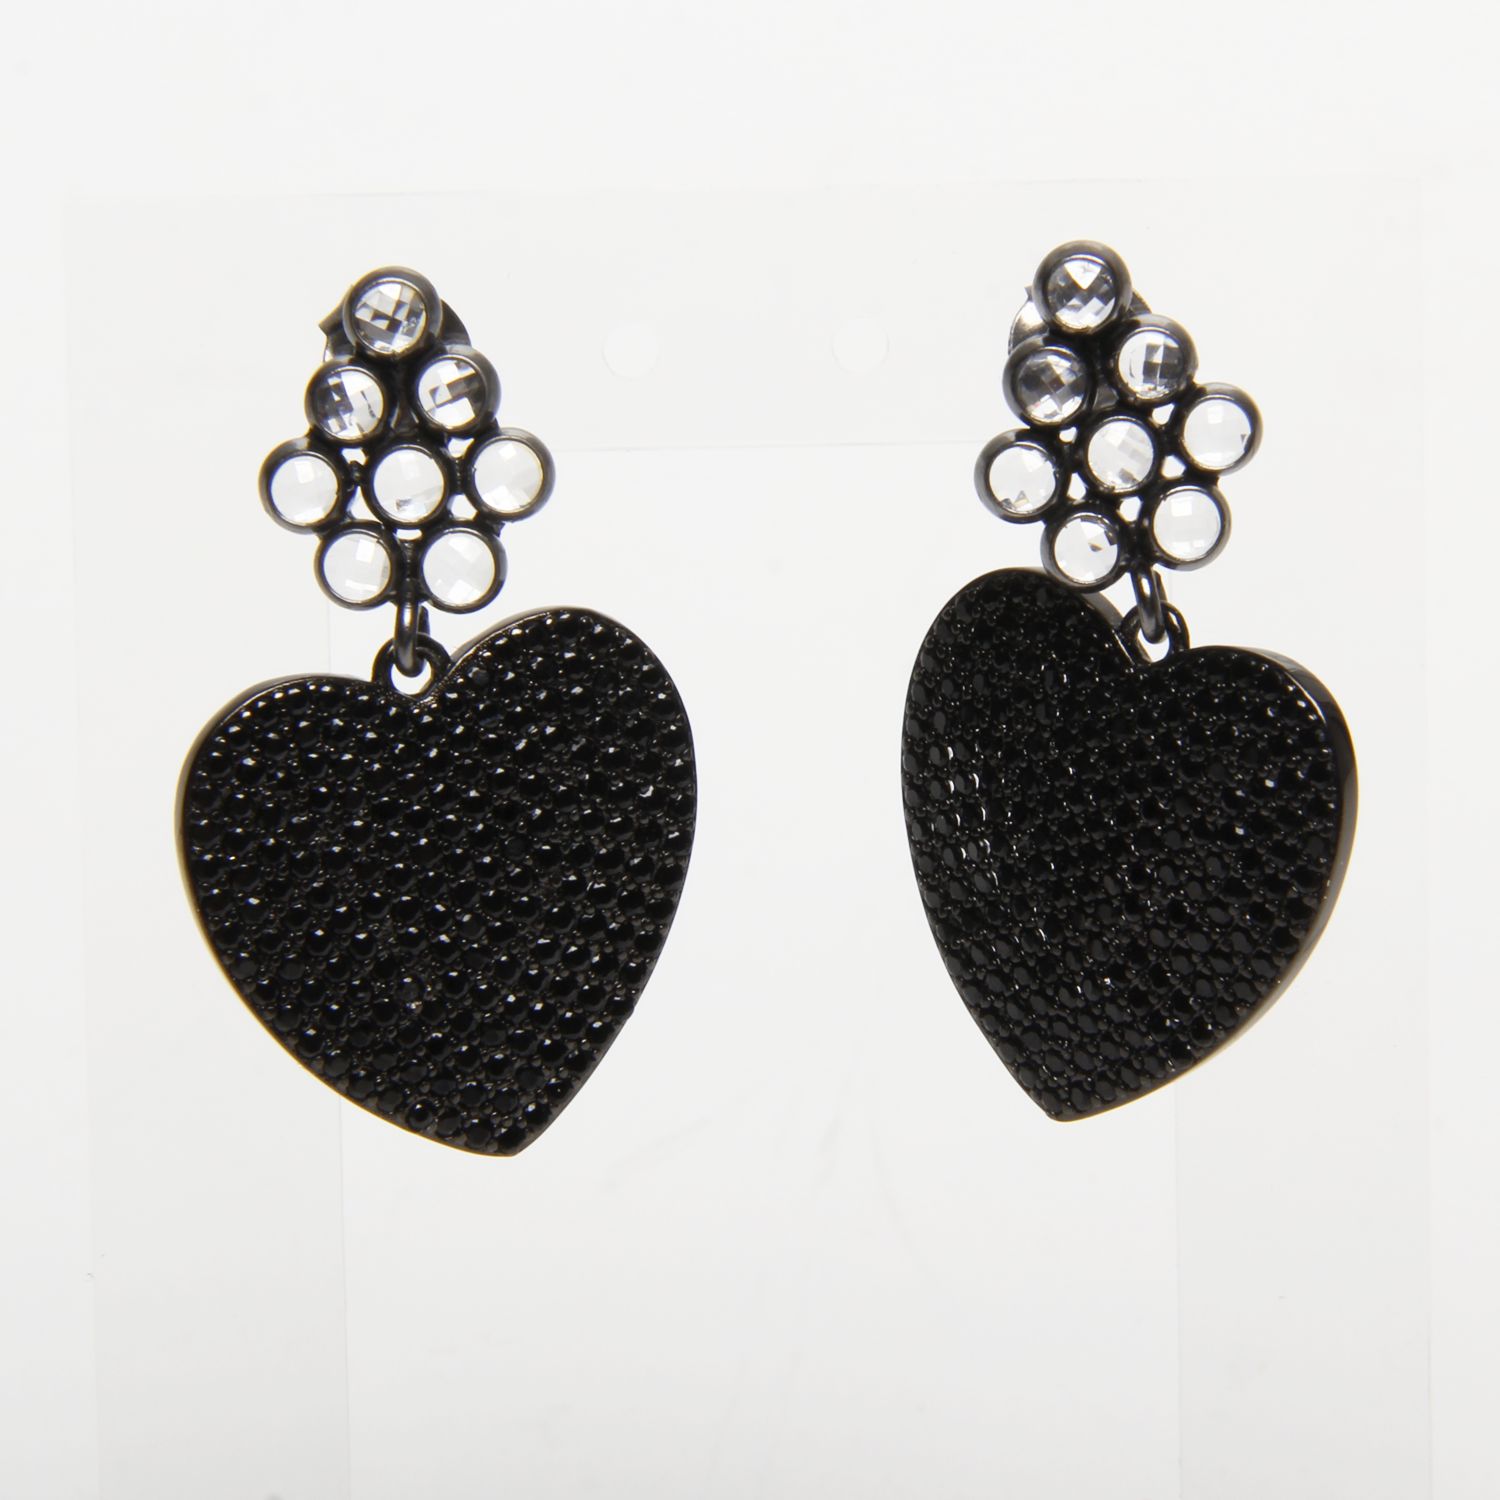 Valentine Rouge Jewellery: Black Amour Heart Earrings Product Image 1 of 2